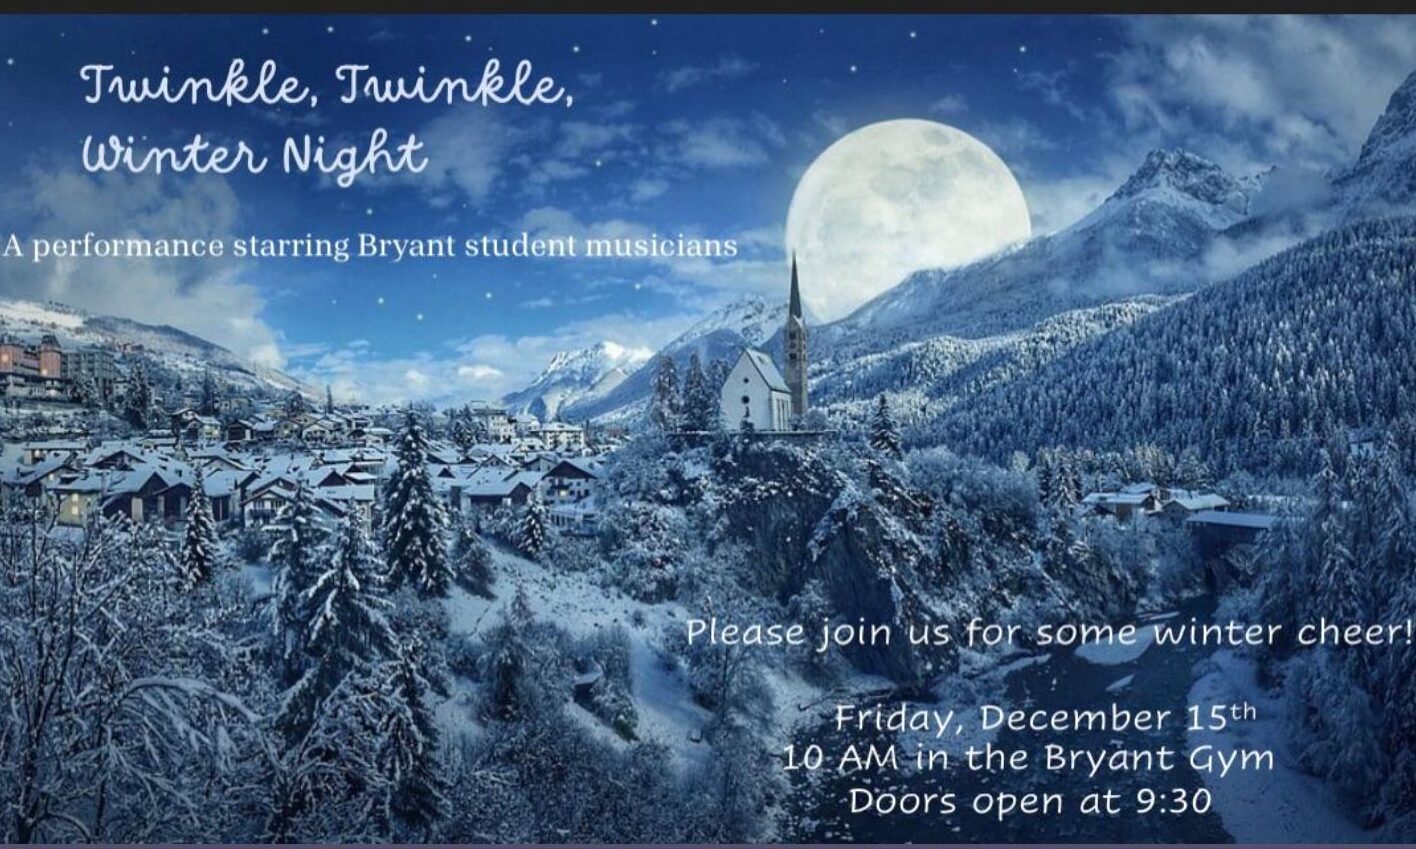 Twinkle, twinkle, winter night. A performance starring Bryant student musicians. Please join us for some winter cheer! Friday, December 15th. 10am in the Bryant gym. Doors open at 9:30am.